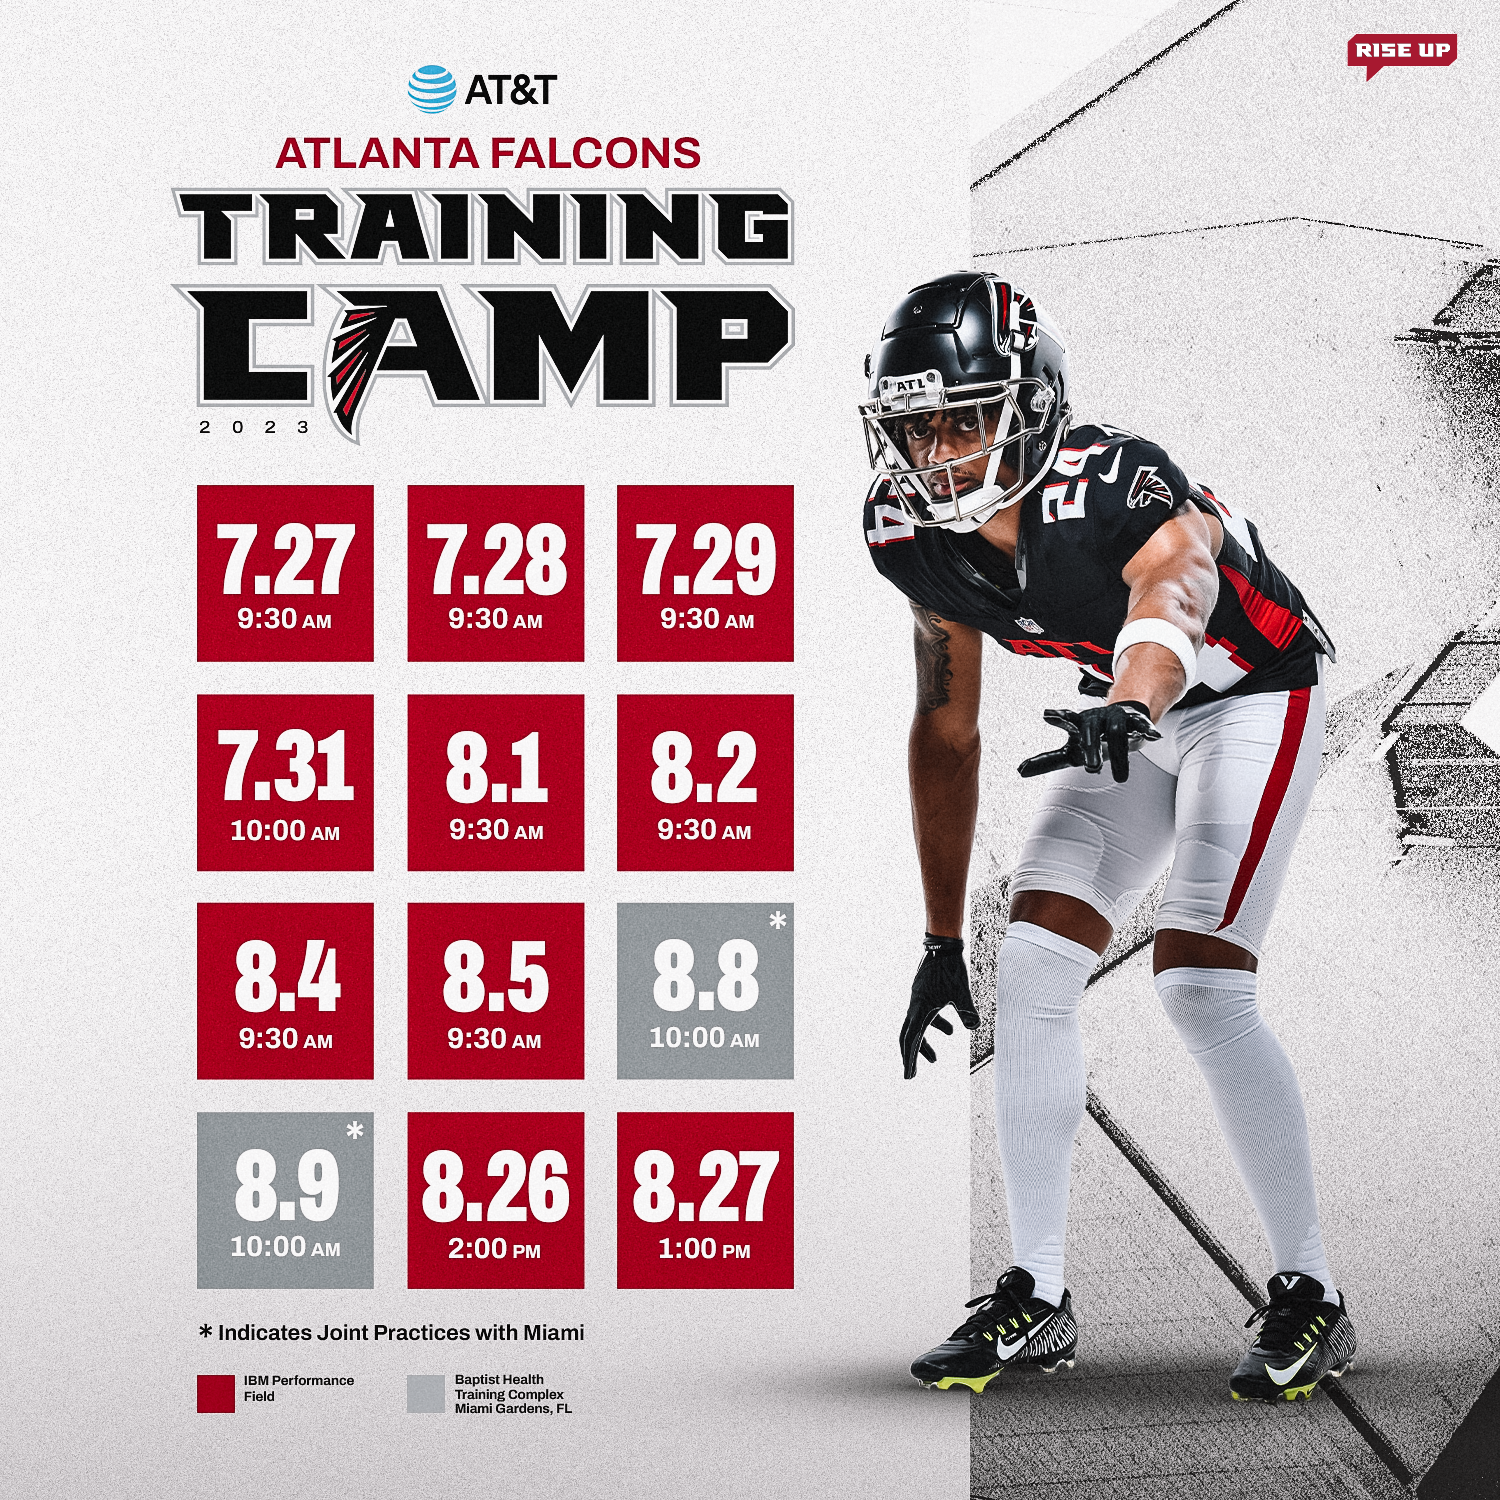 nfl training camp tickets